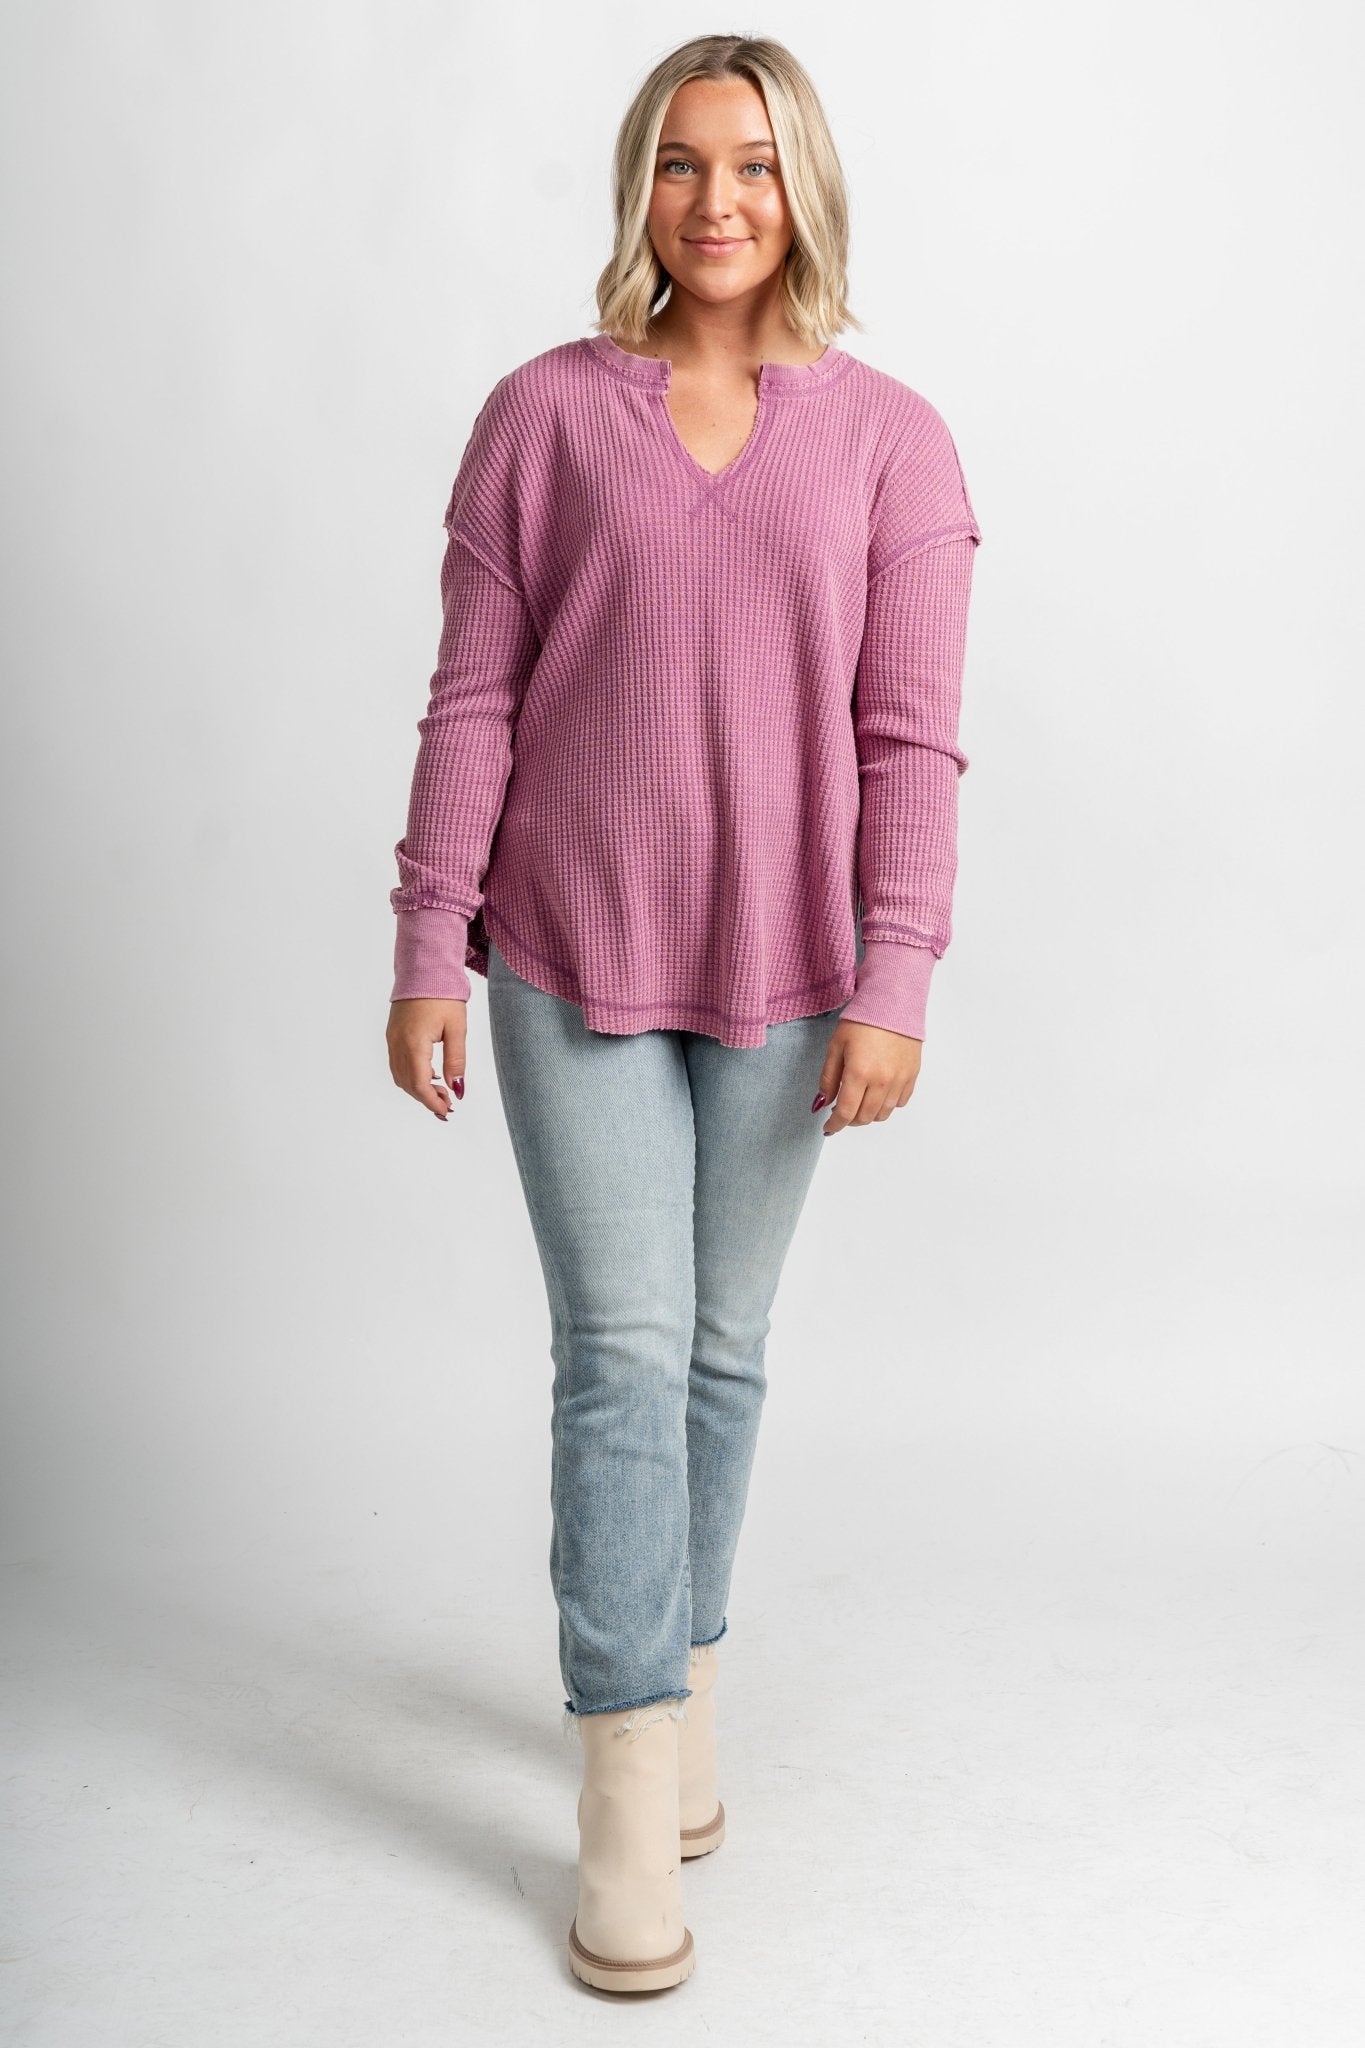 Z Supply thermal long sleeve top azalea - Z Supply top - Z Supply Clothing at Lush Fashion Lounge Trendy Boutique Oklahoma City